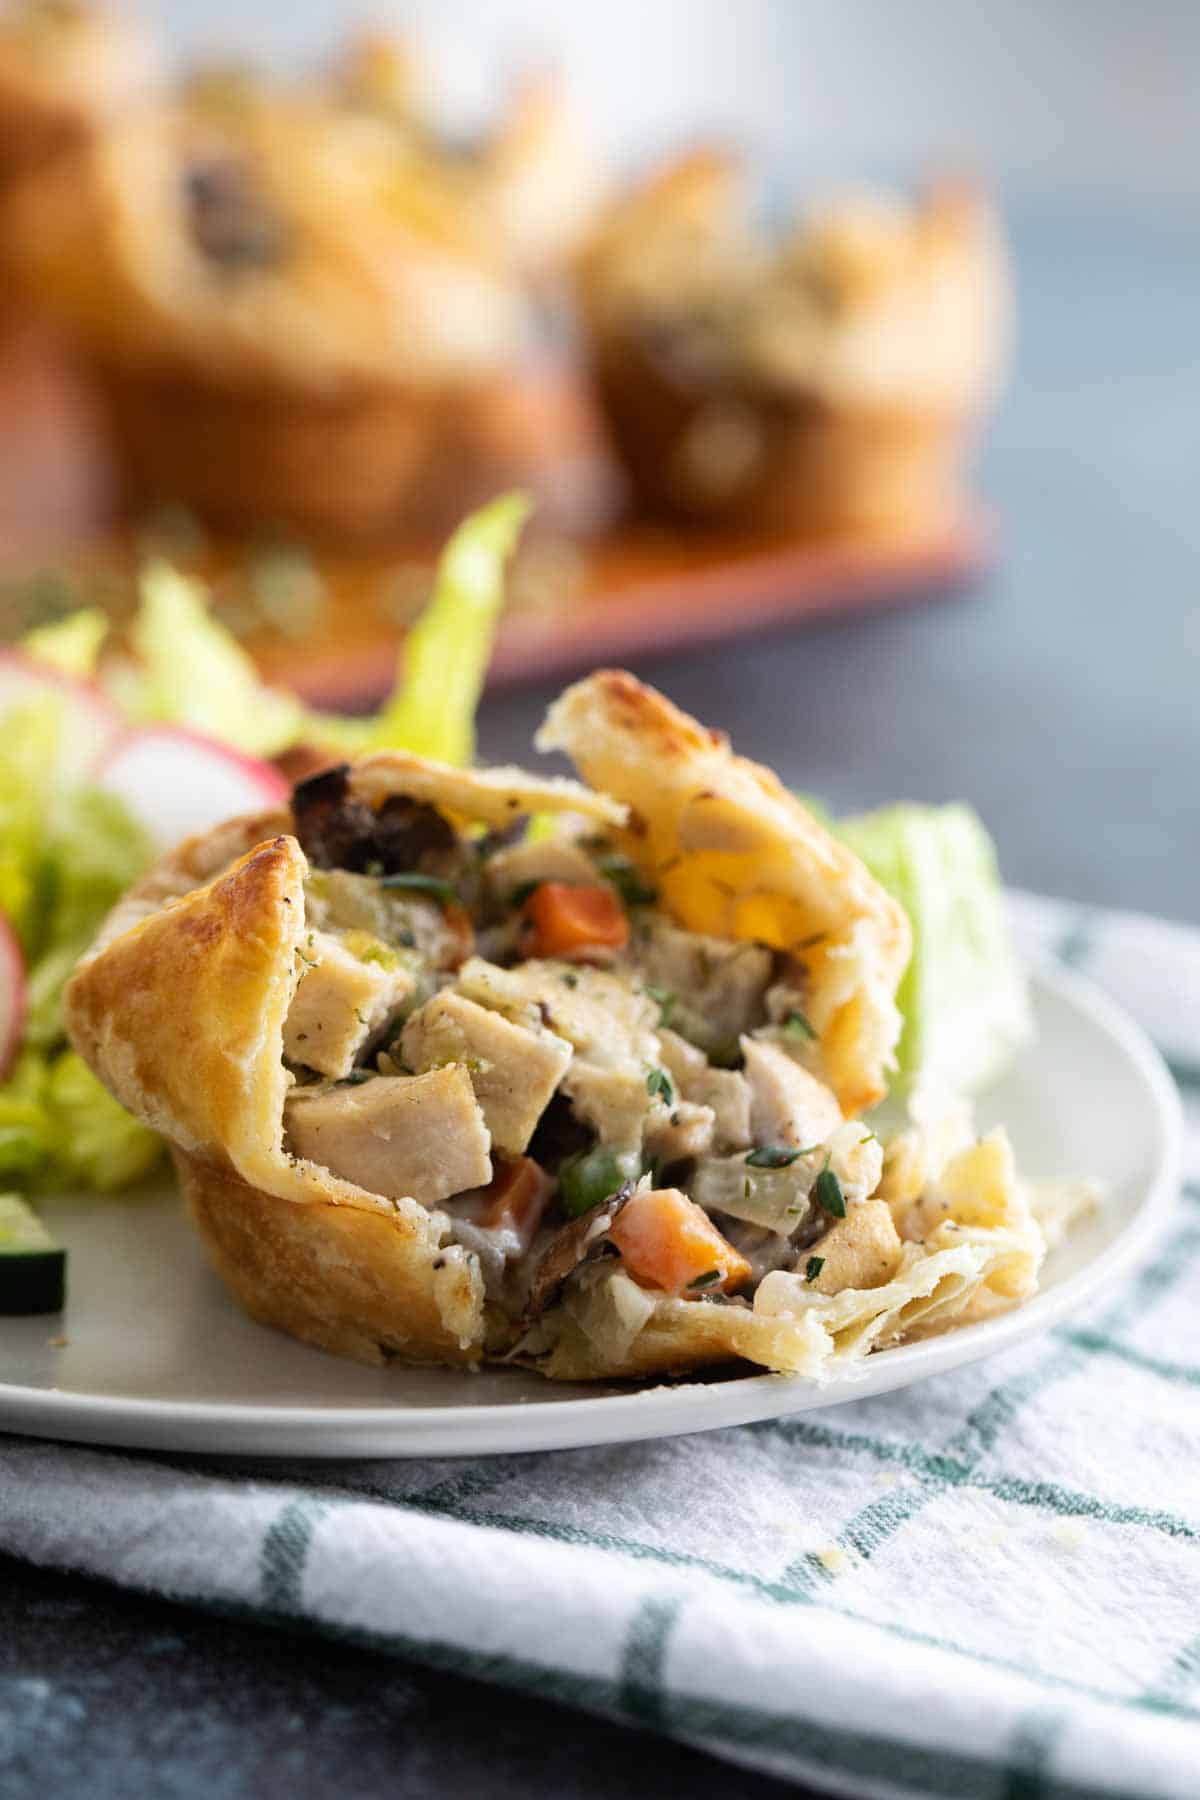 Mini Chicken Pot Pie with Puff Pastry on a plate for serving.